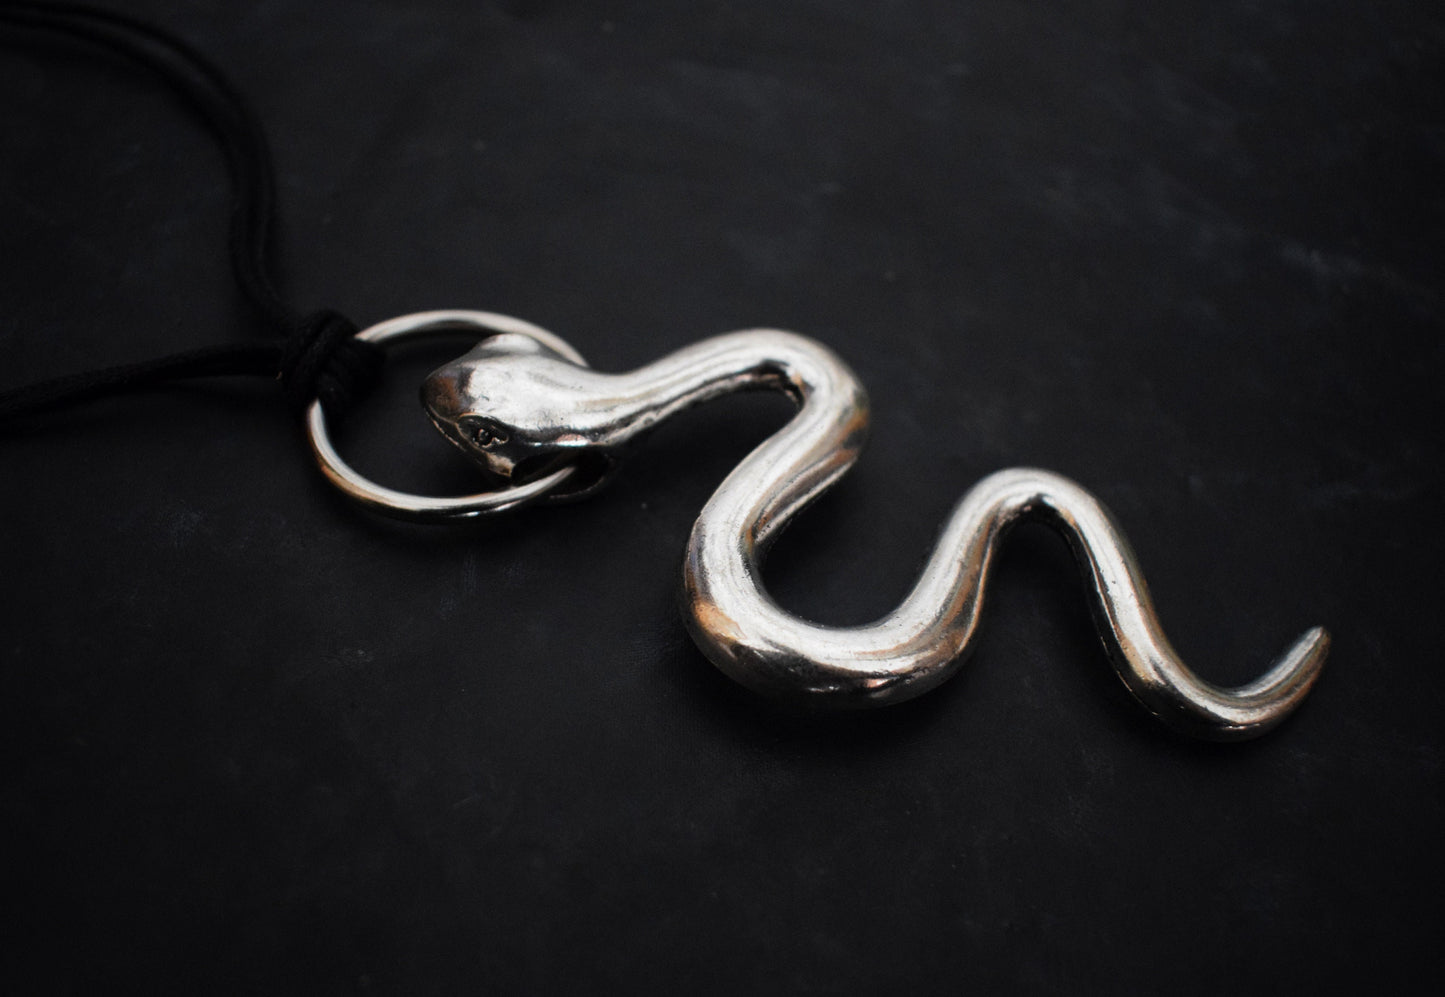 Snake Pendant Serpent Necklace Symbolic Jewelry O ring viper necklace serpent collar